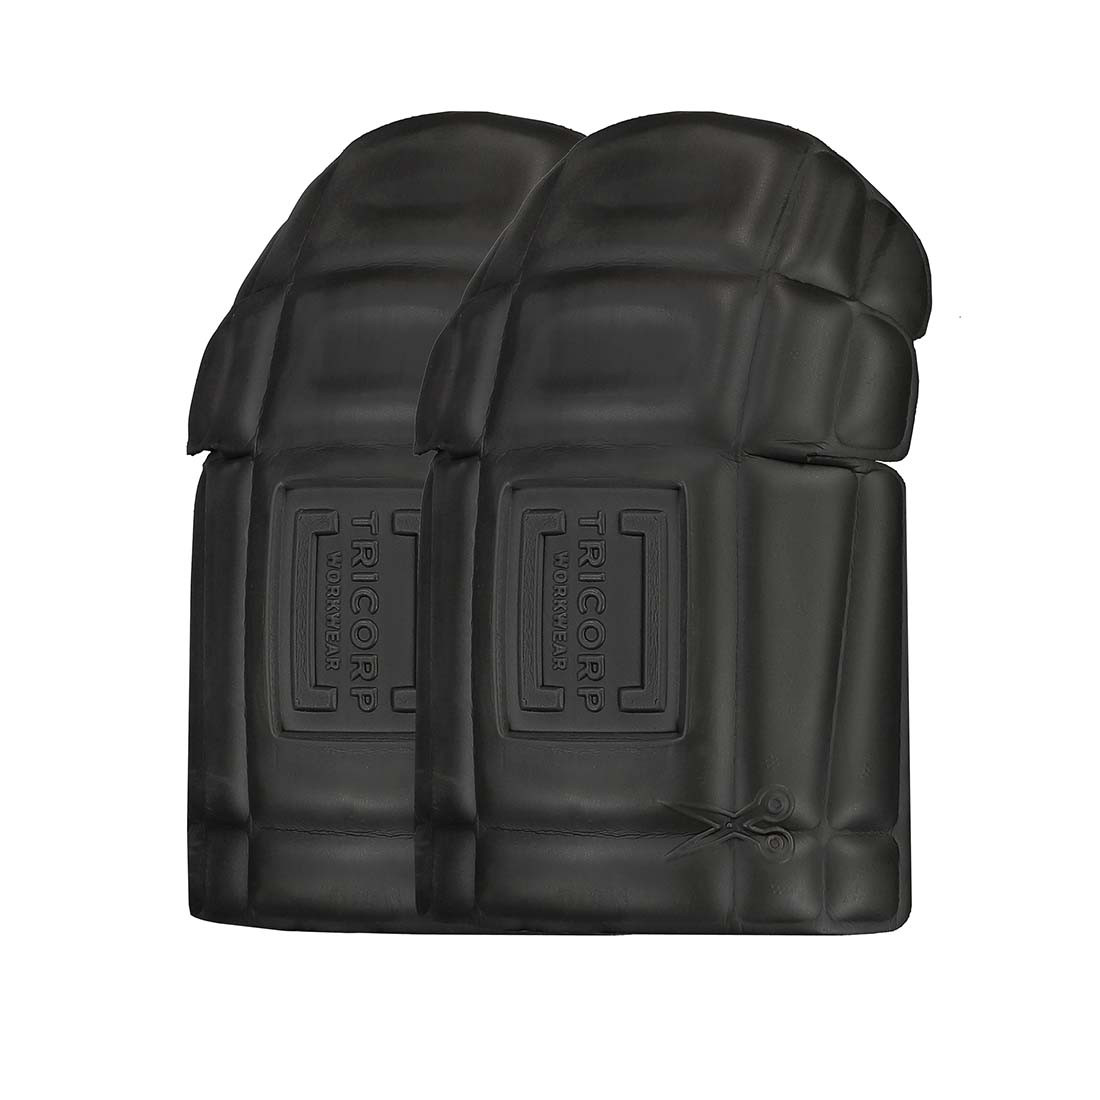 Kneepads - Personal protection